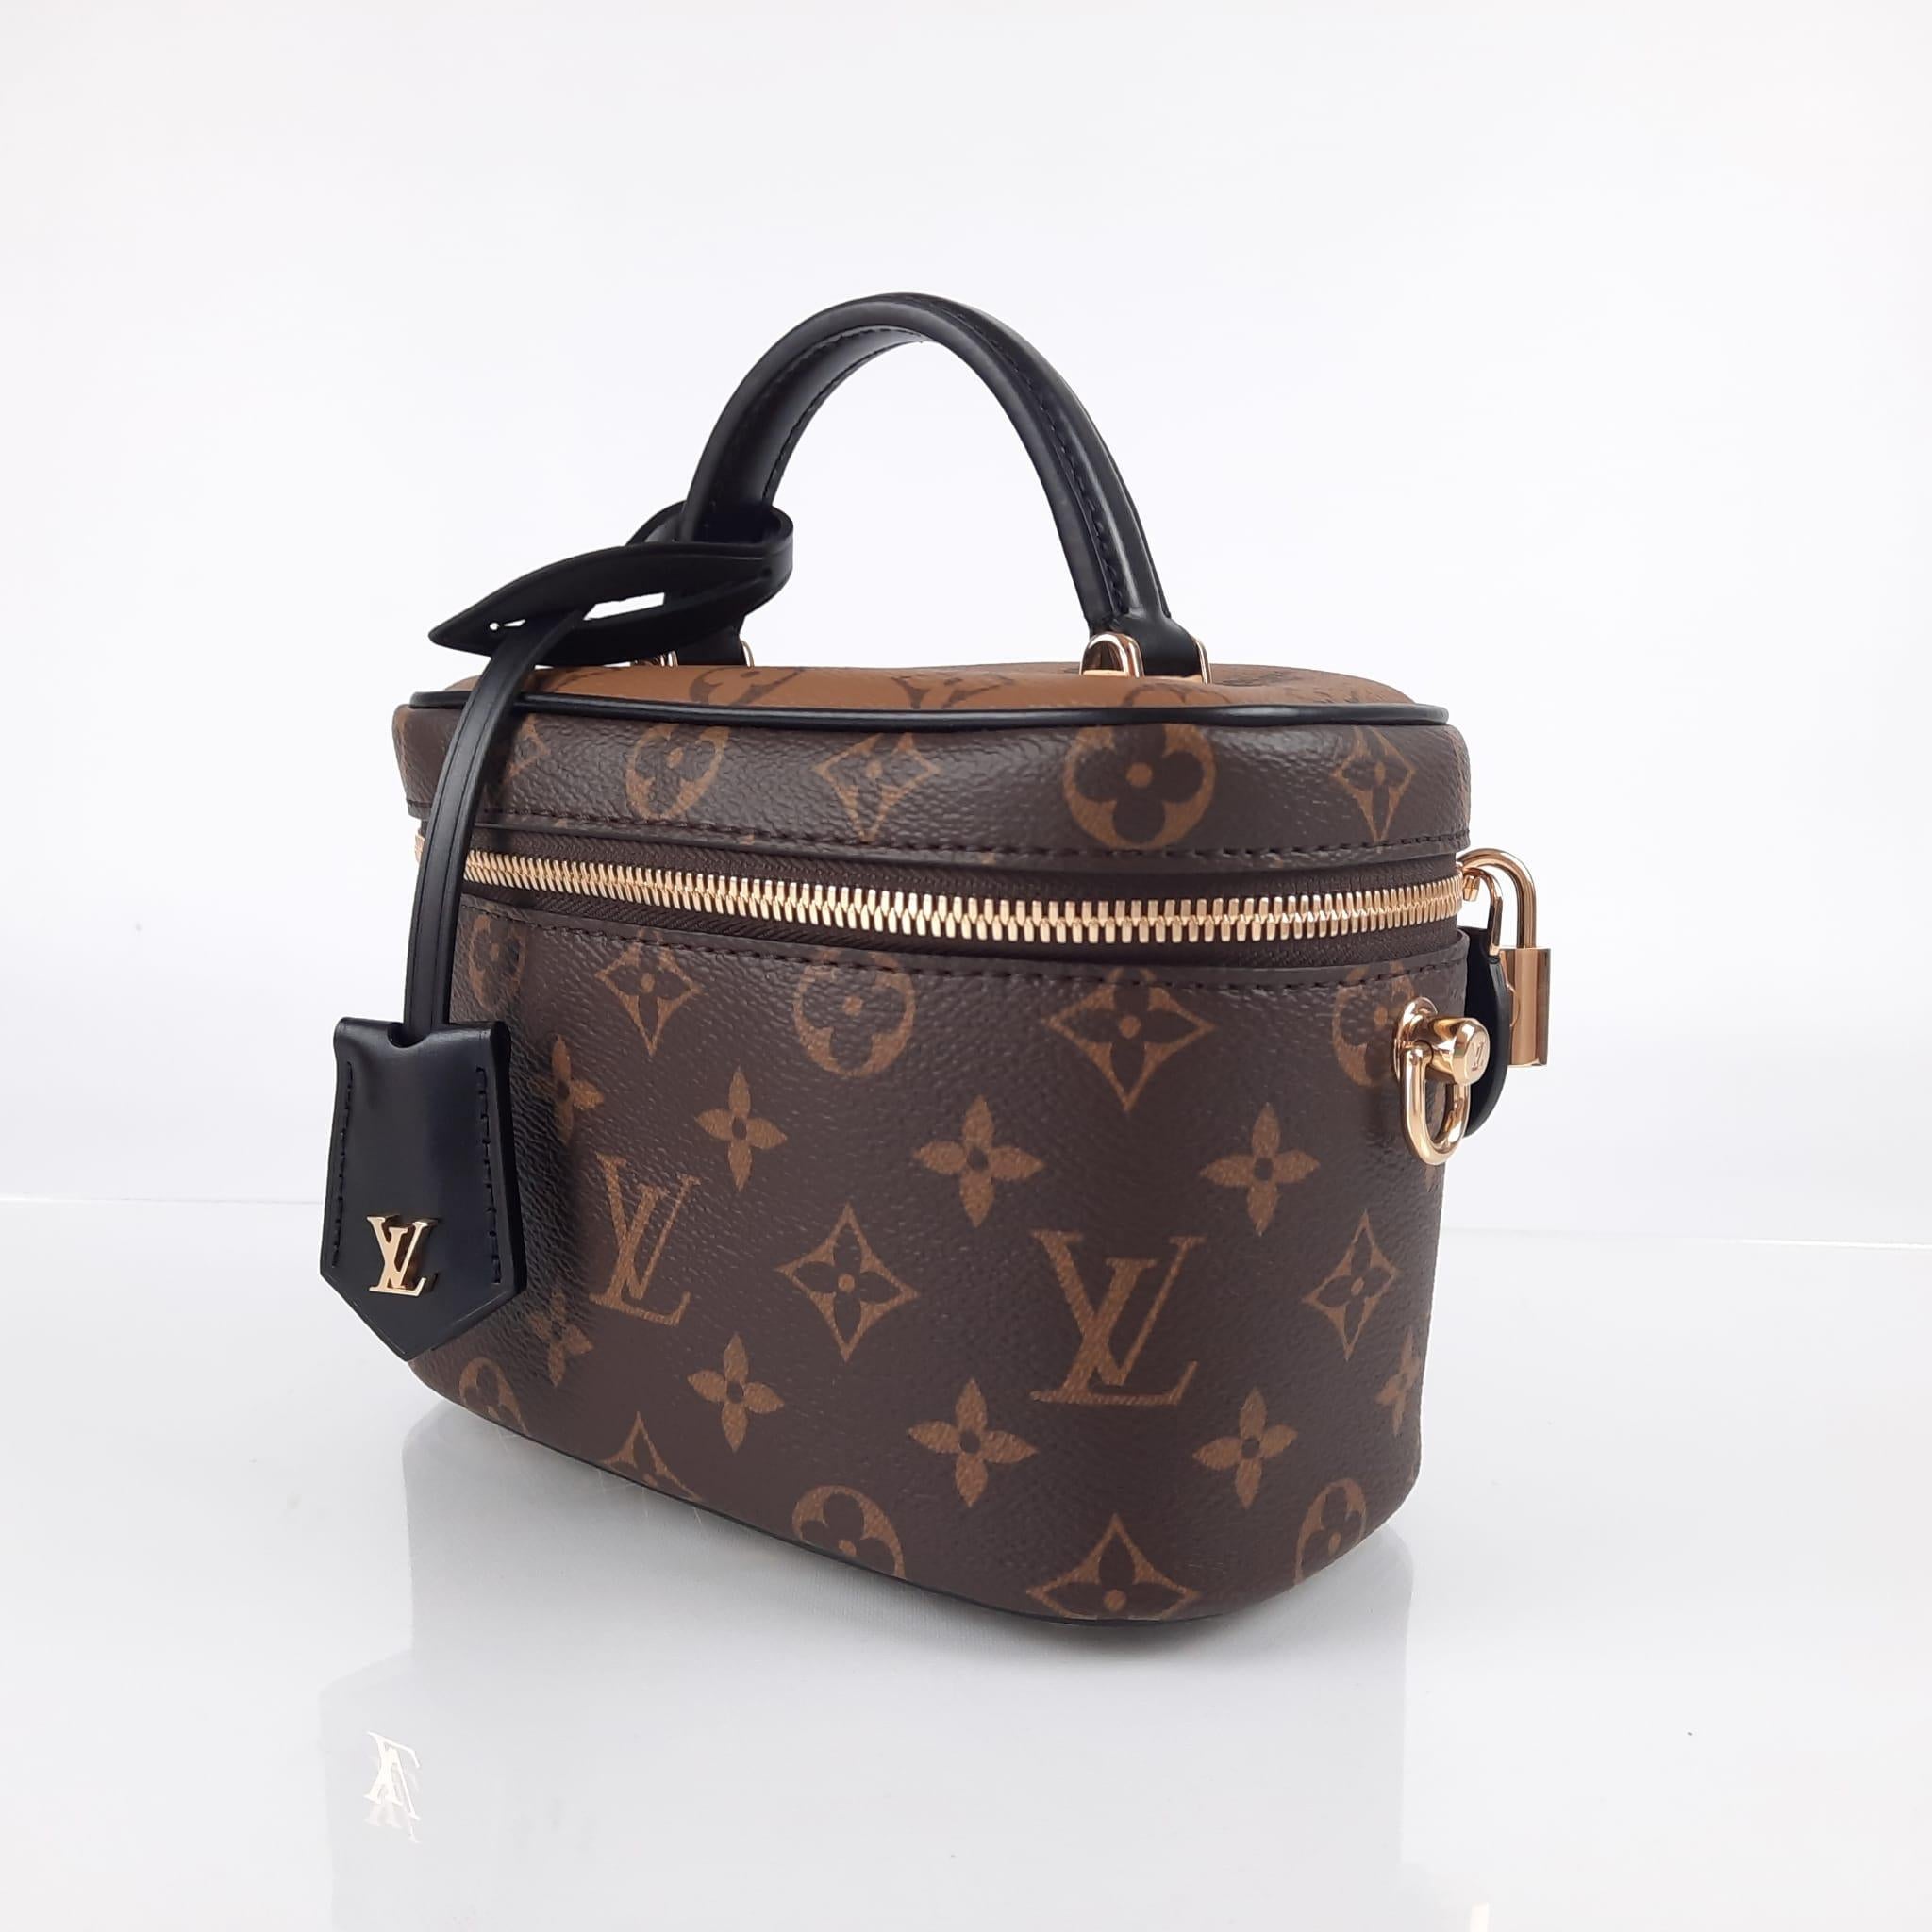 For Spring-Summer 2020, Nicolas Ghesquière has dreamed up a modern-day ode to Louis Vuitton’s travel heritage: an update of the Nice vanity kit as a trendy city bag in Monogram and Monogram Reverse canvas. Lightweight, compact and supple, it is easy